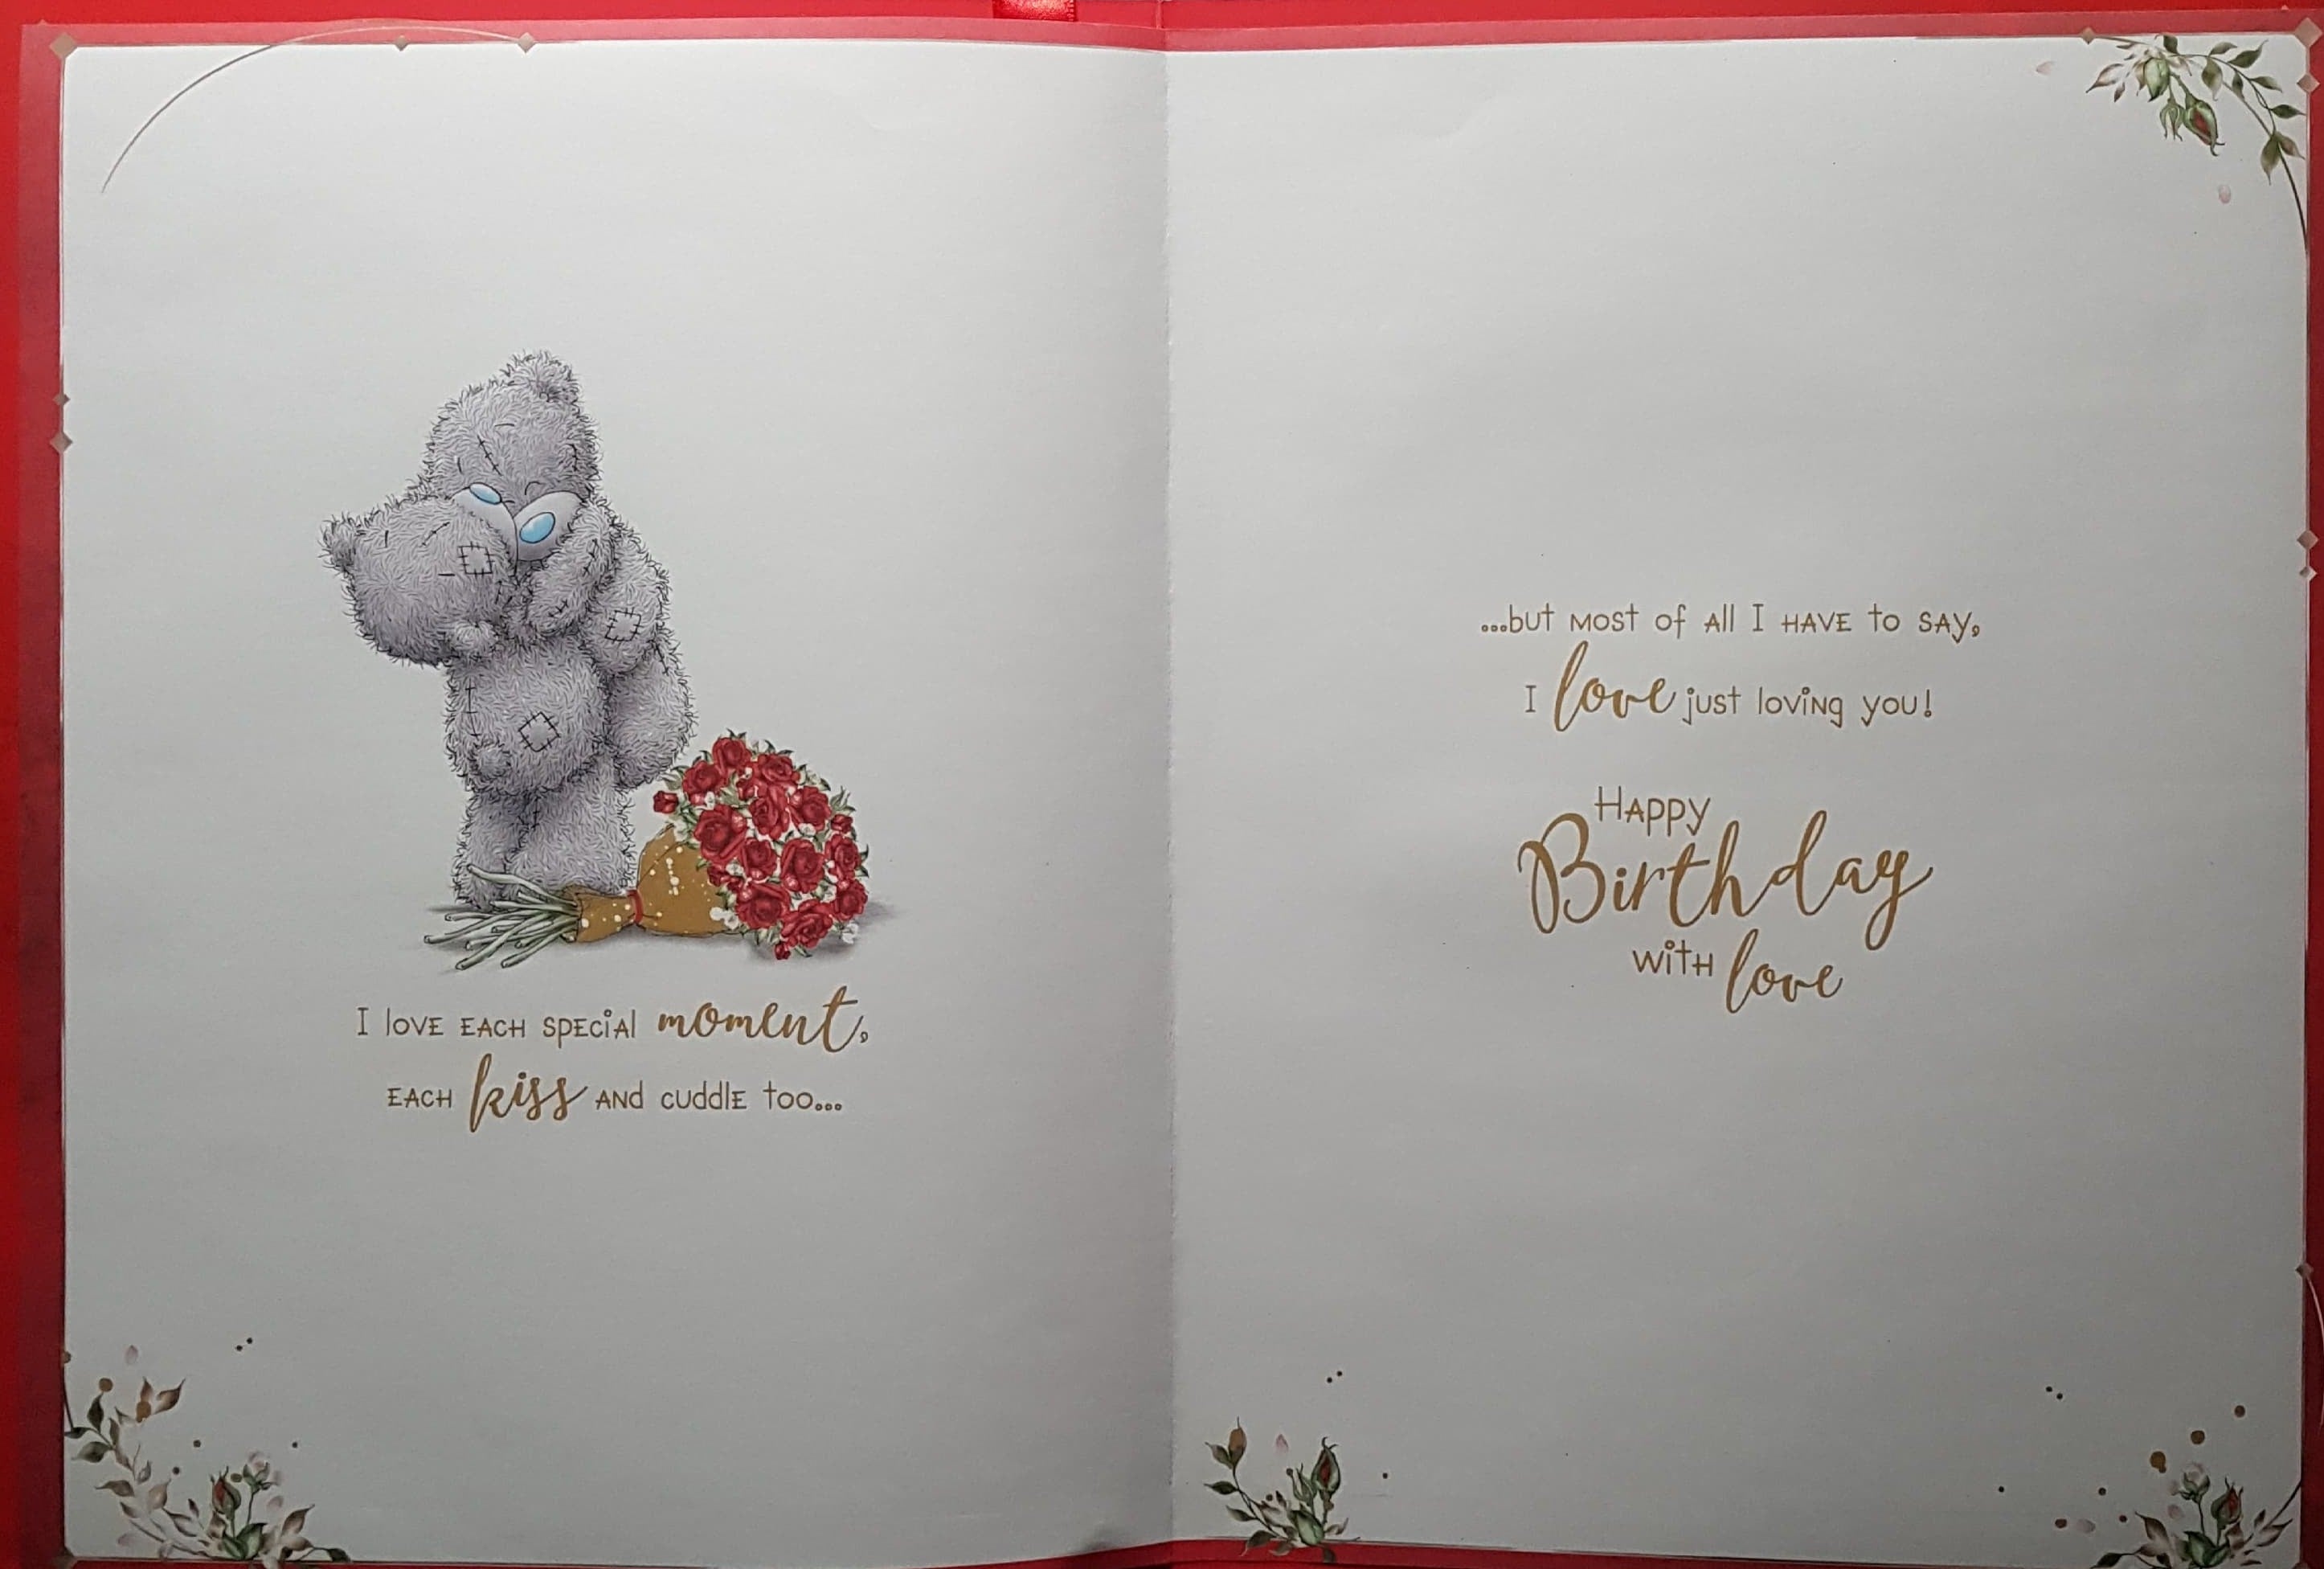 Birthday Card - Wife / To My Beautiful Wife...& Ruby Hearts (A Card In A Box)